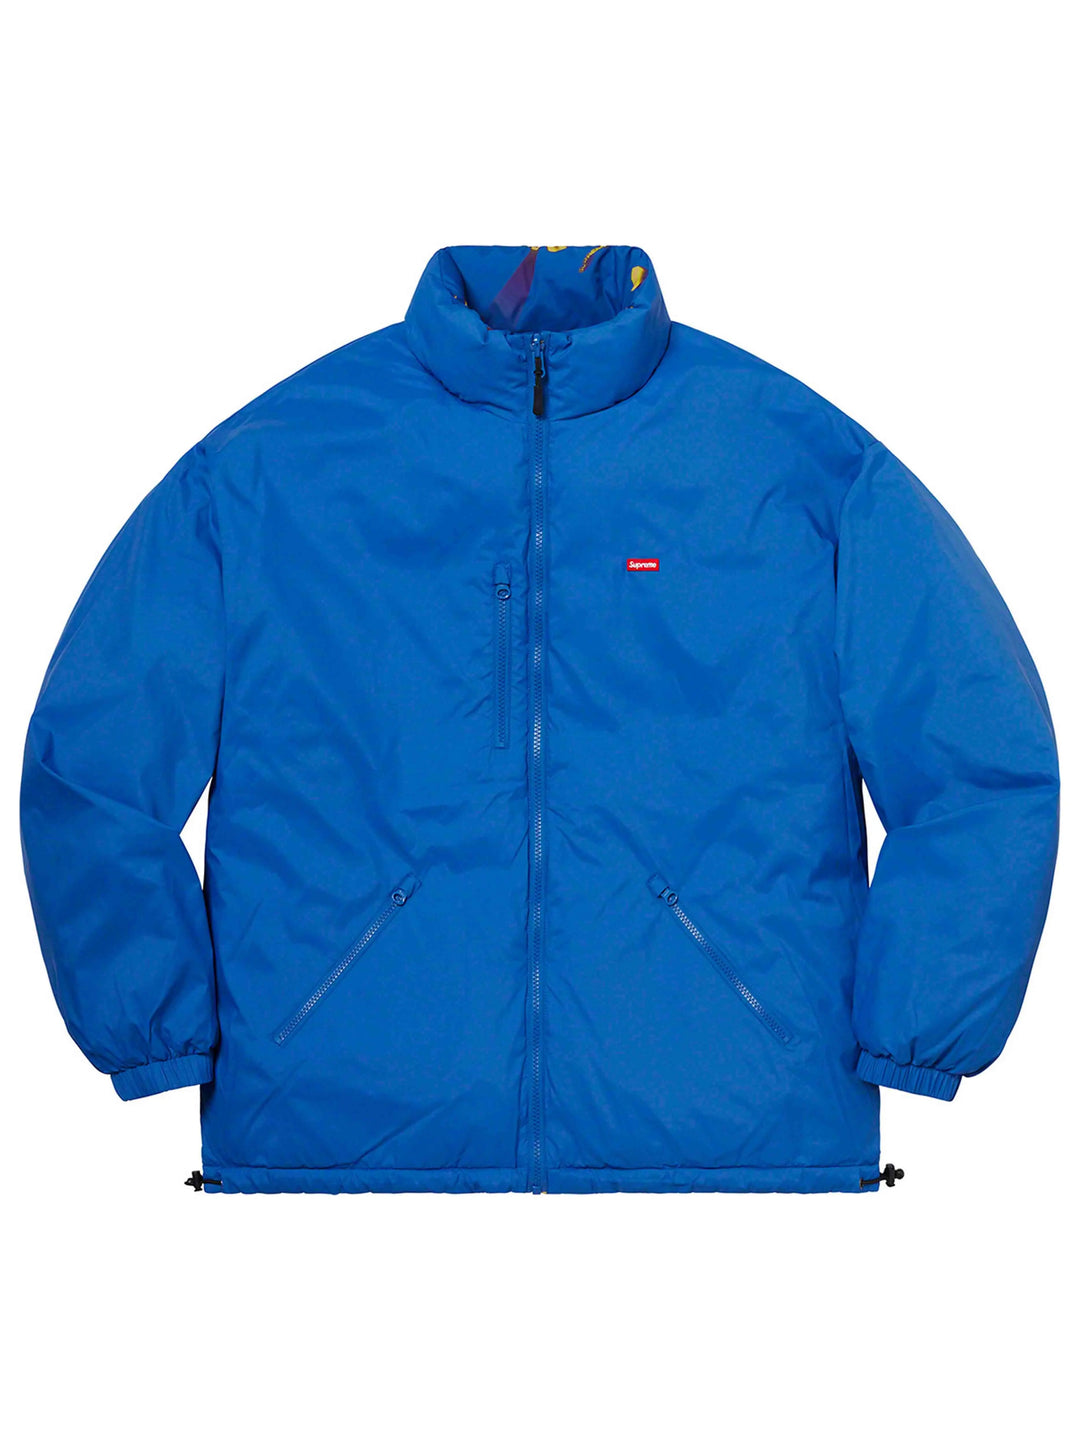 Supreme Watches Reversible Puffer Jacket Royal [FW20] Prior